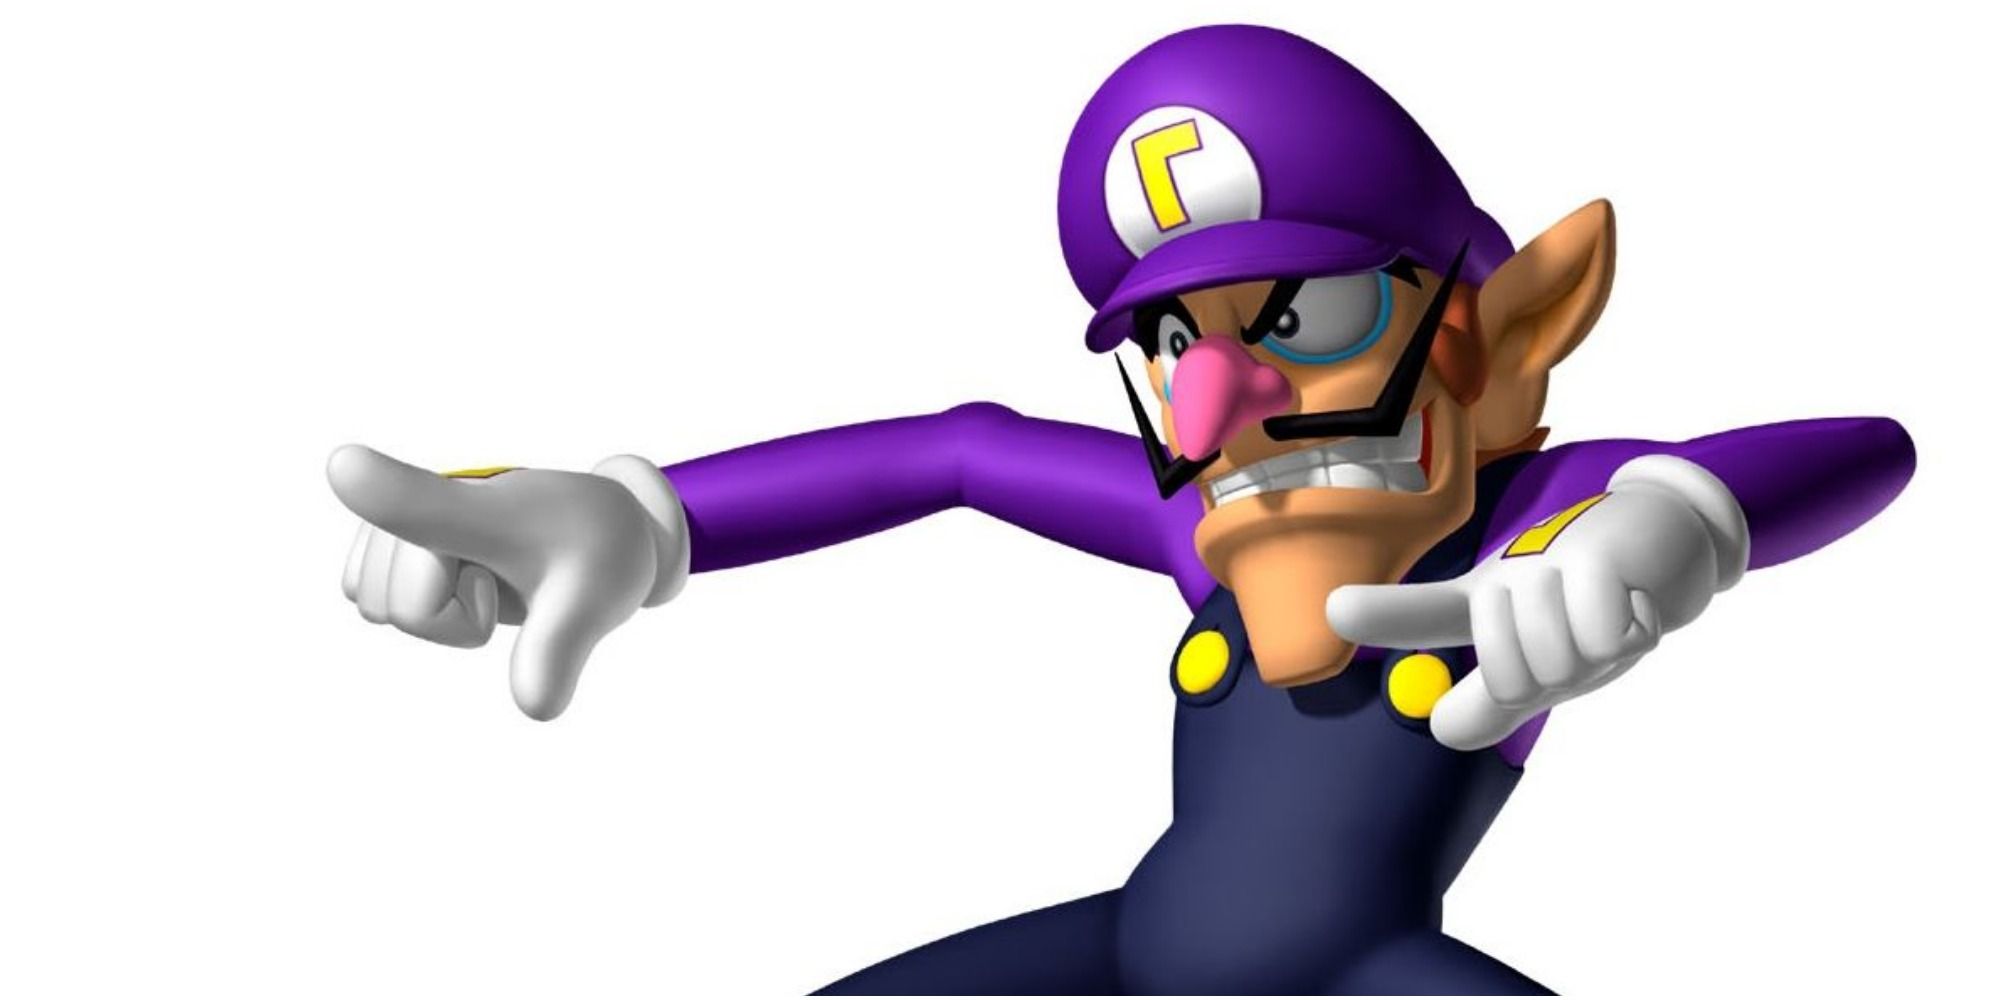 10 Nintendo Villains We Want to See as DLC in Super Smash Bros Ultimate